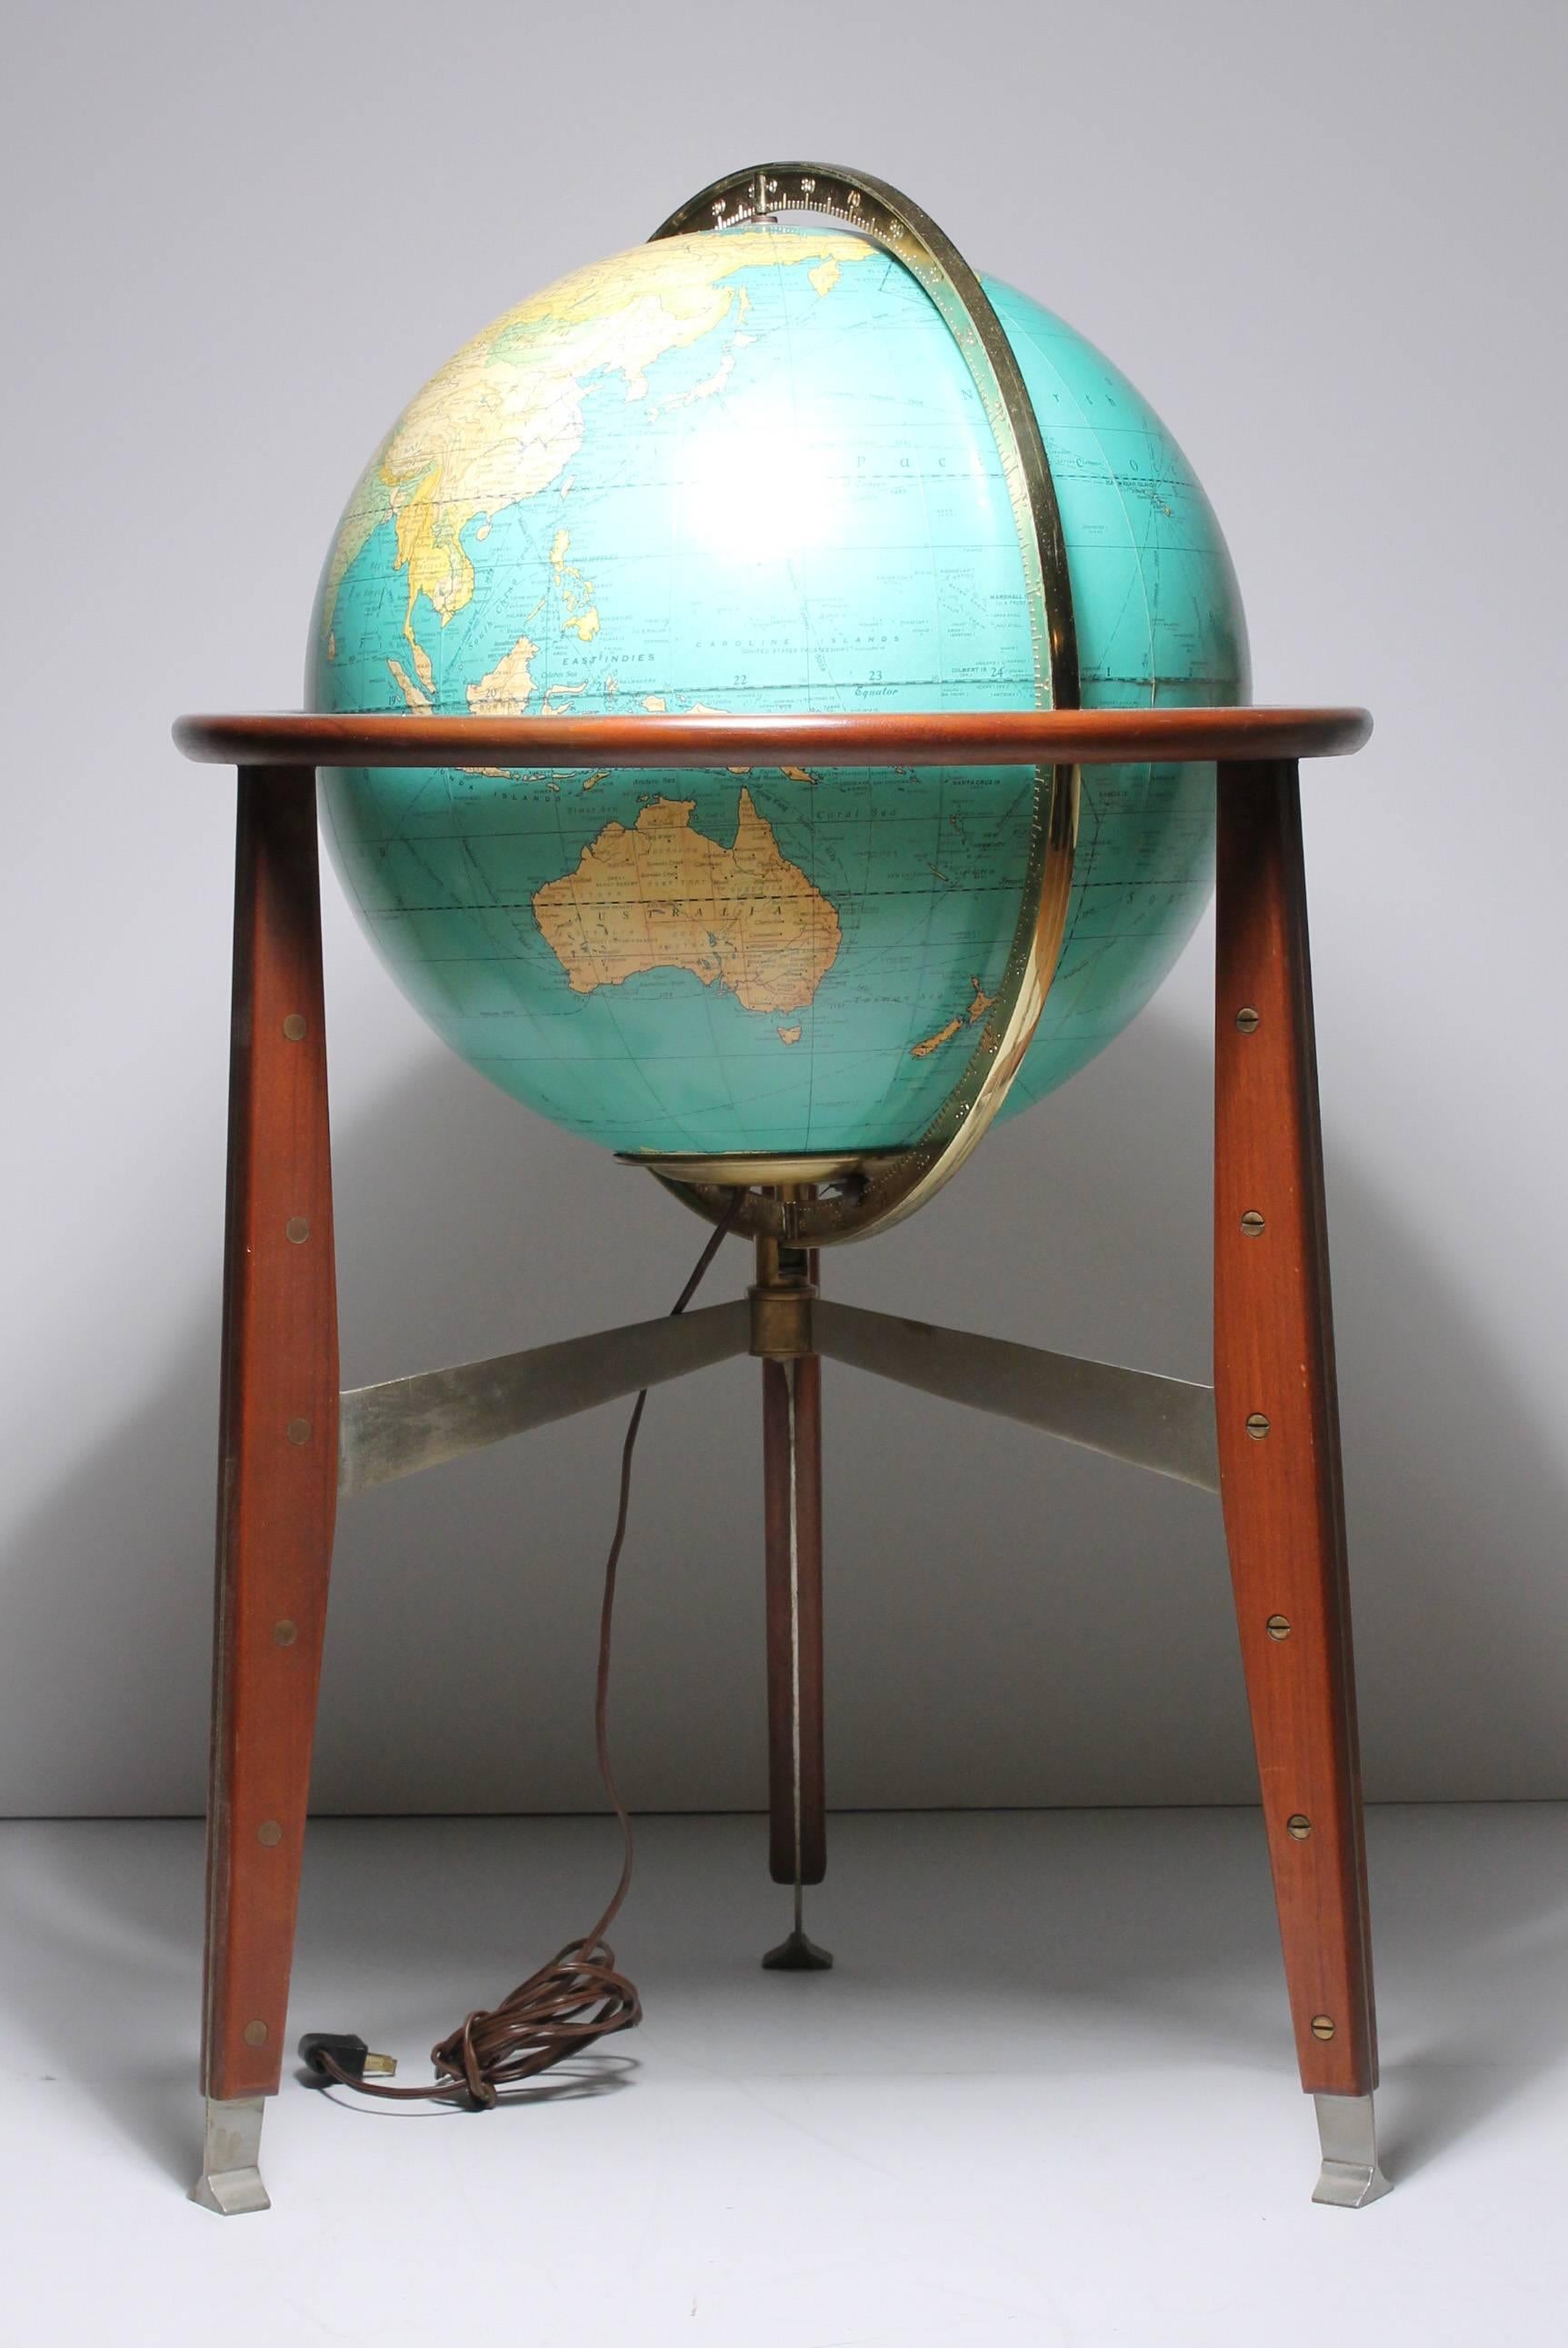 Mid-Century Modern Illuminated Globe Lamp by Edward Wormley for Dunbar (Featured in Catalog) For Sale